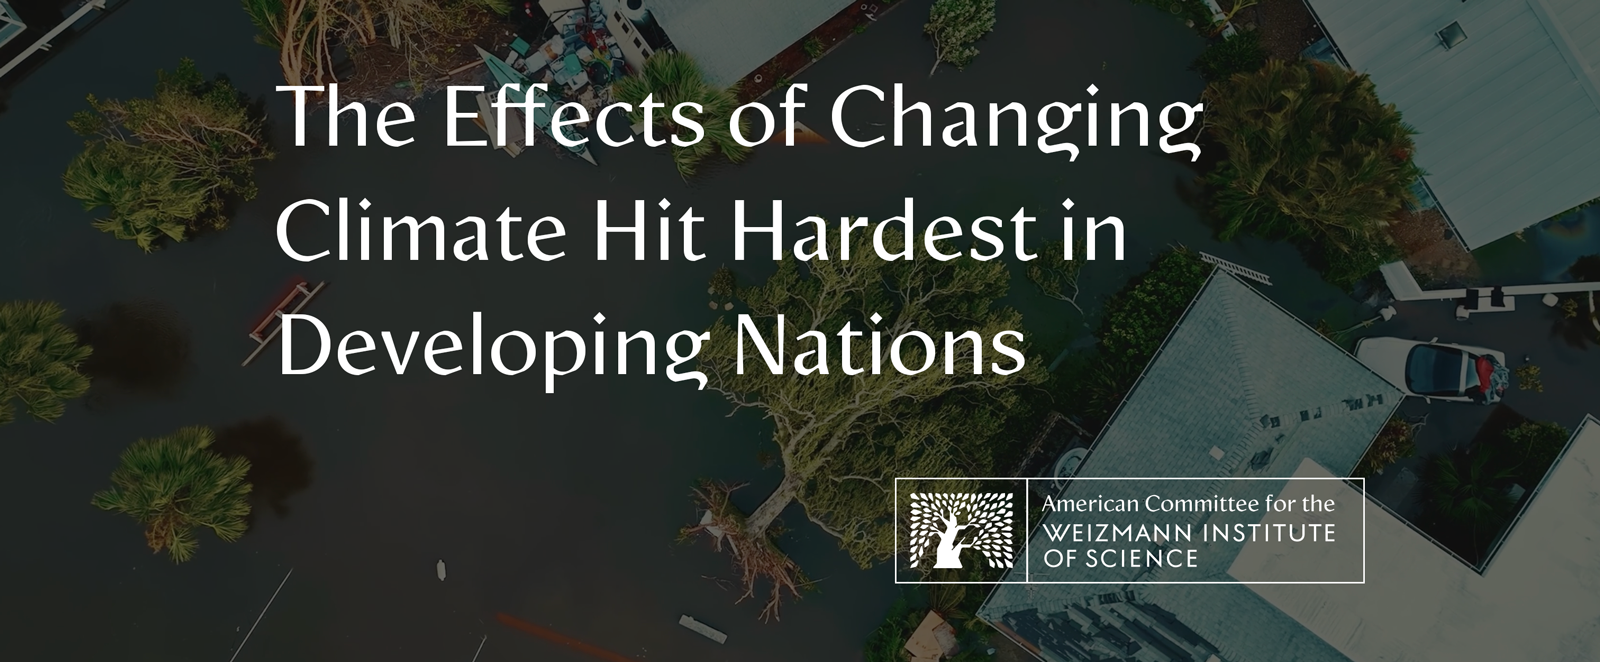 The Effects of Changing Climate Hit Hardest in Developing Nations